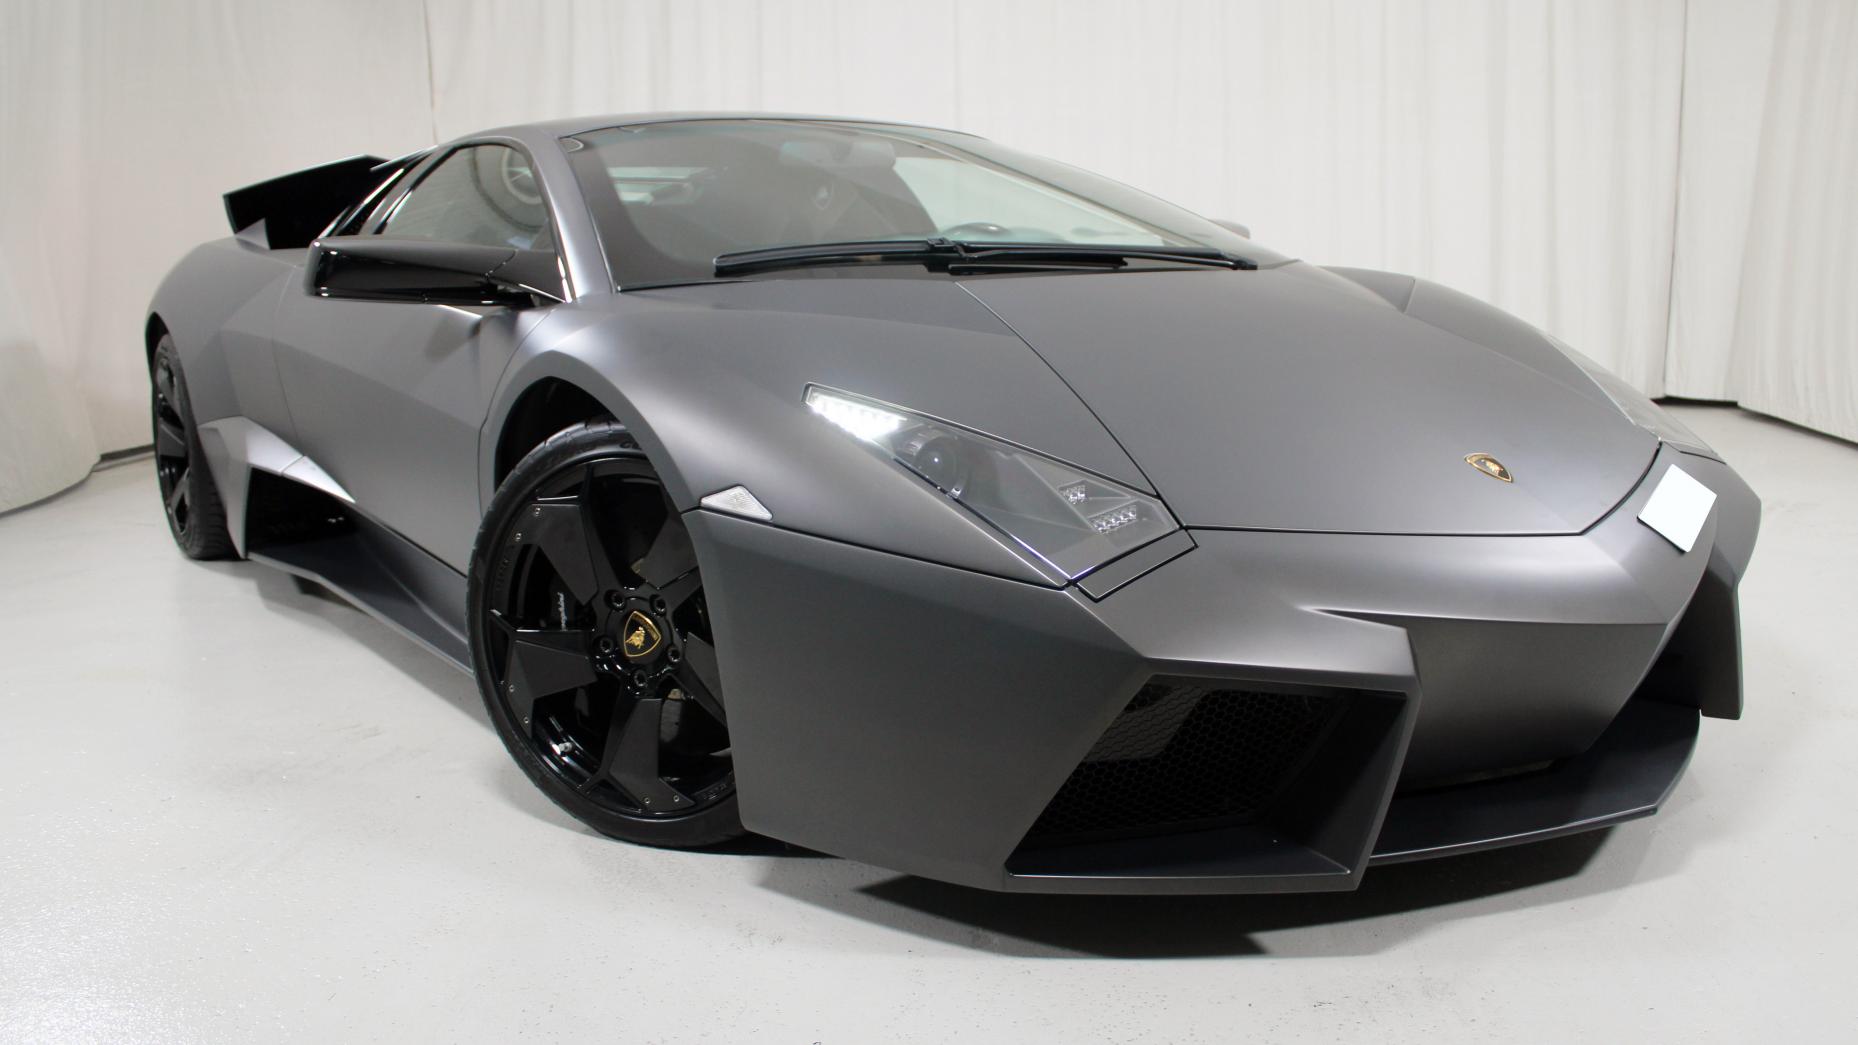 Check out these stunning supercars heading to auction